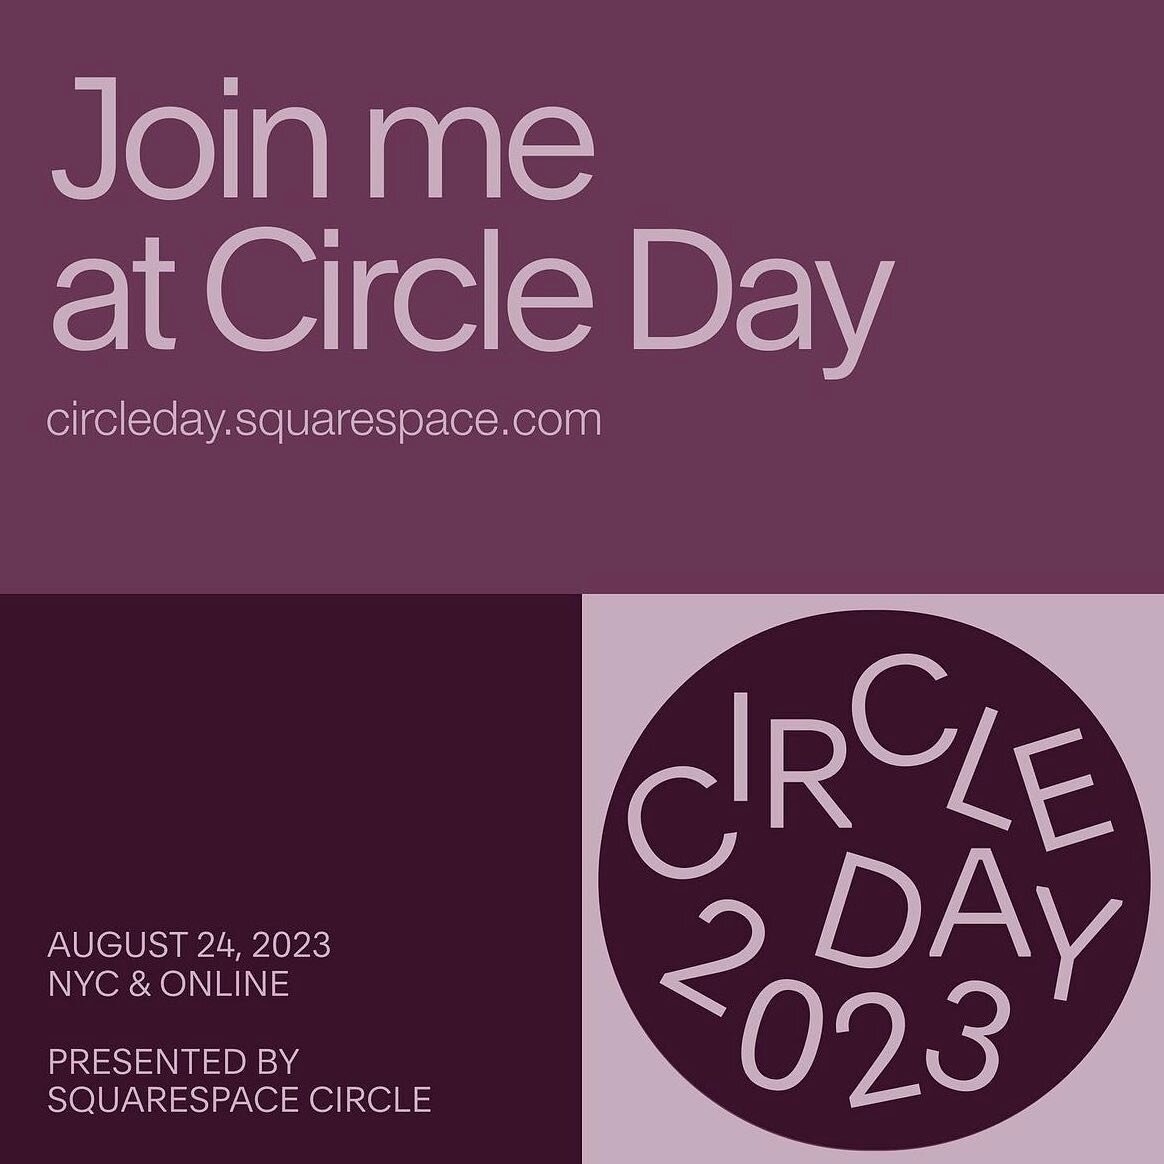 Excited to be at @squarespace&rsquo;s Circle Day this week! Seeing some old friends, meeting some friends IRL for the first time, and can&rsquo;t wait for the new connections. New York&hellip; coming for you!